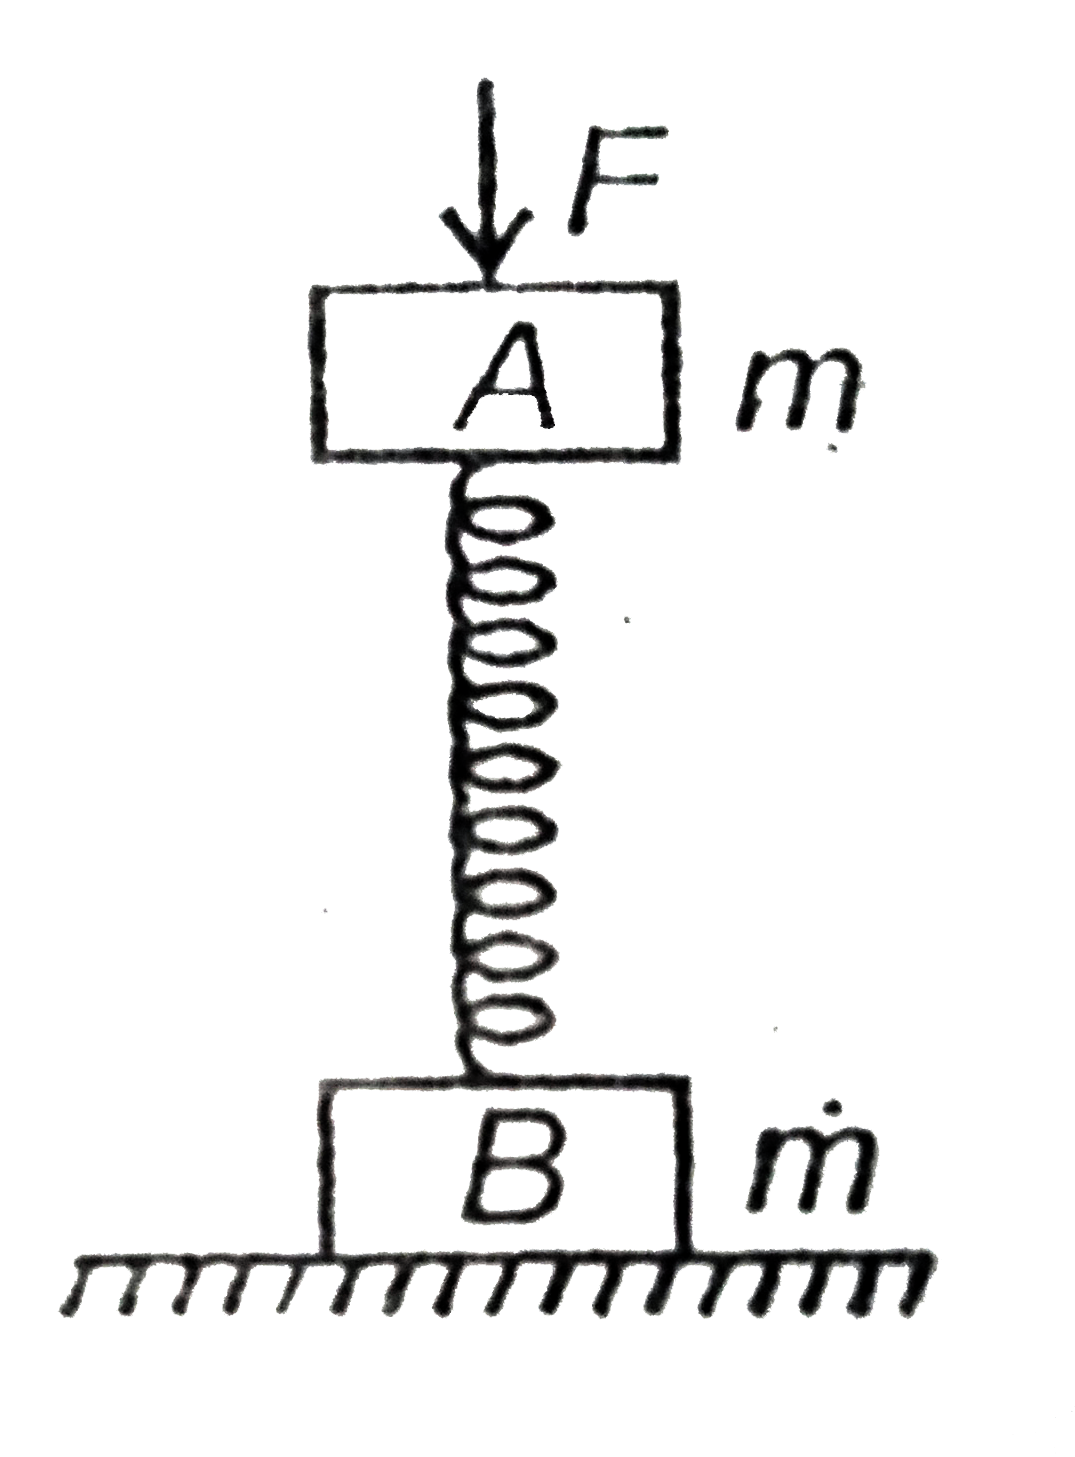 A system consists of t wo identical masses A and B of mass m each connected to ends of a massless spring of force constant k as shown in figure.      The minimum force F applied vertically downward on A, such that on its release, B will leave the floor.